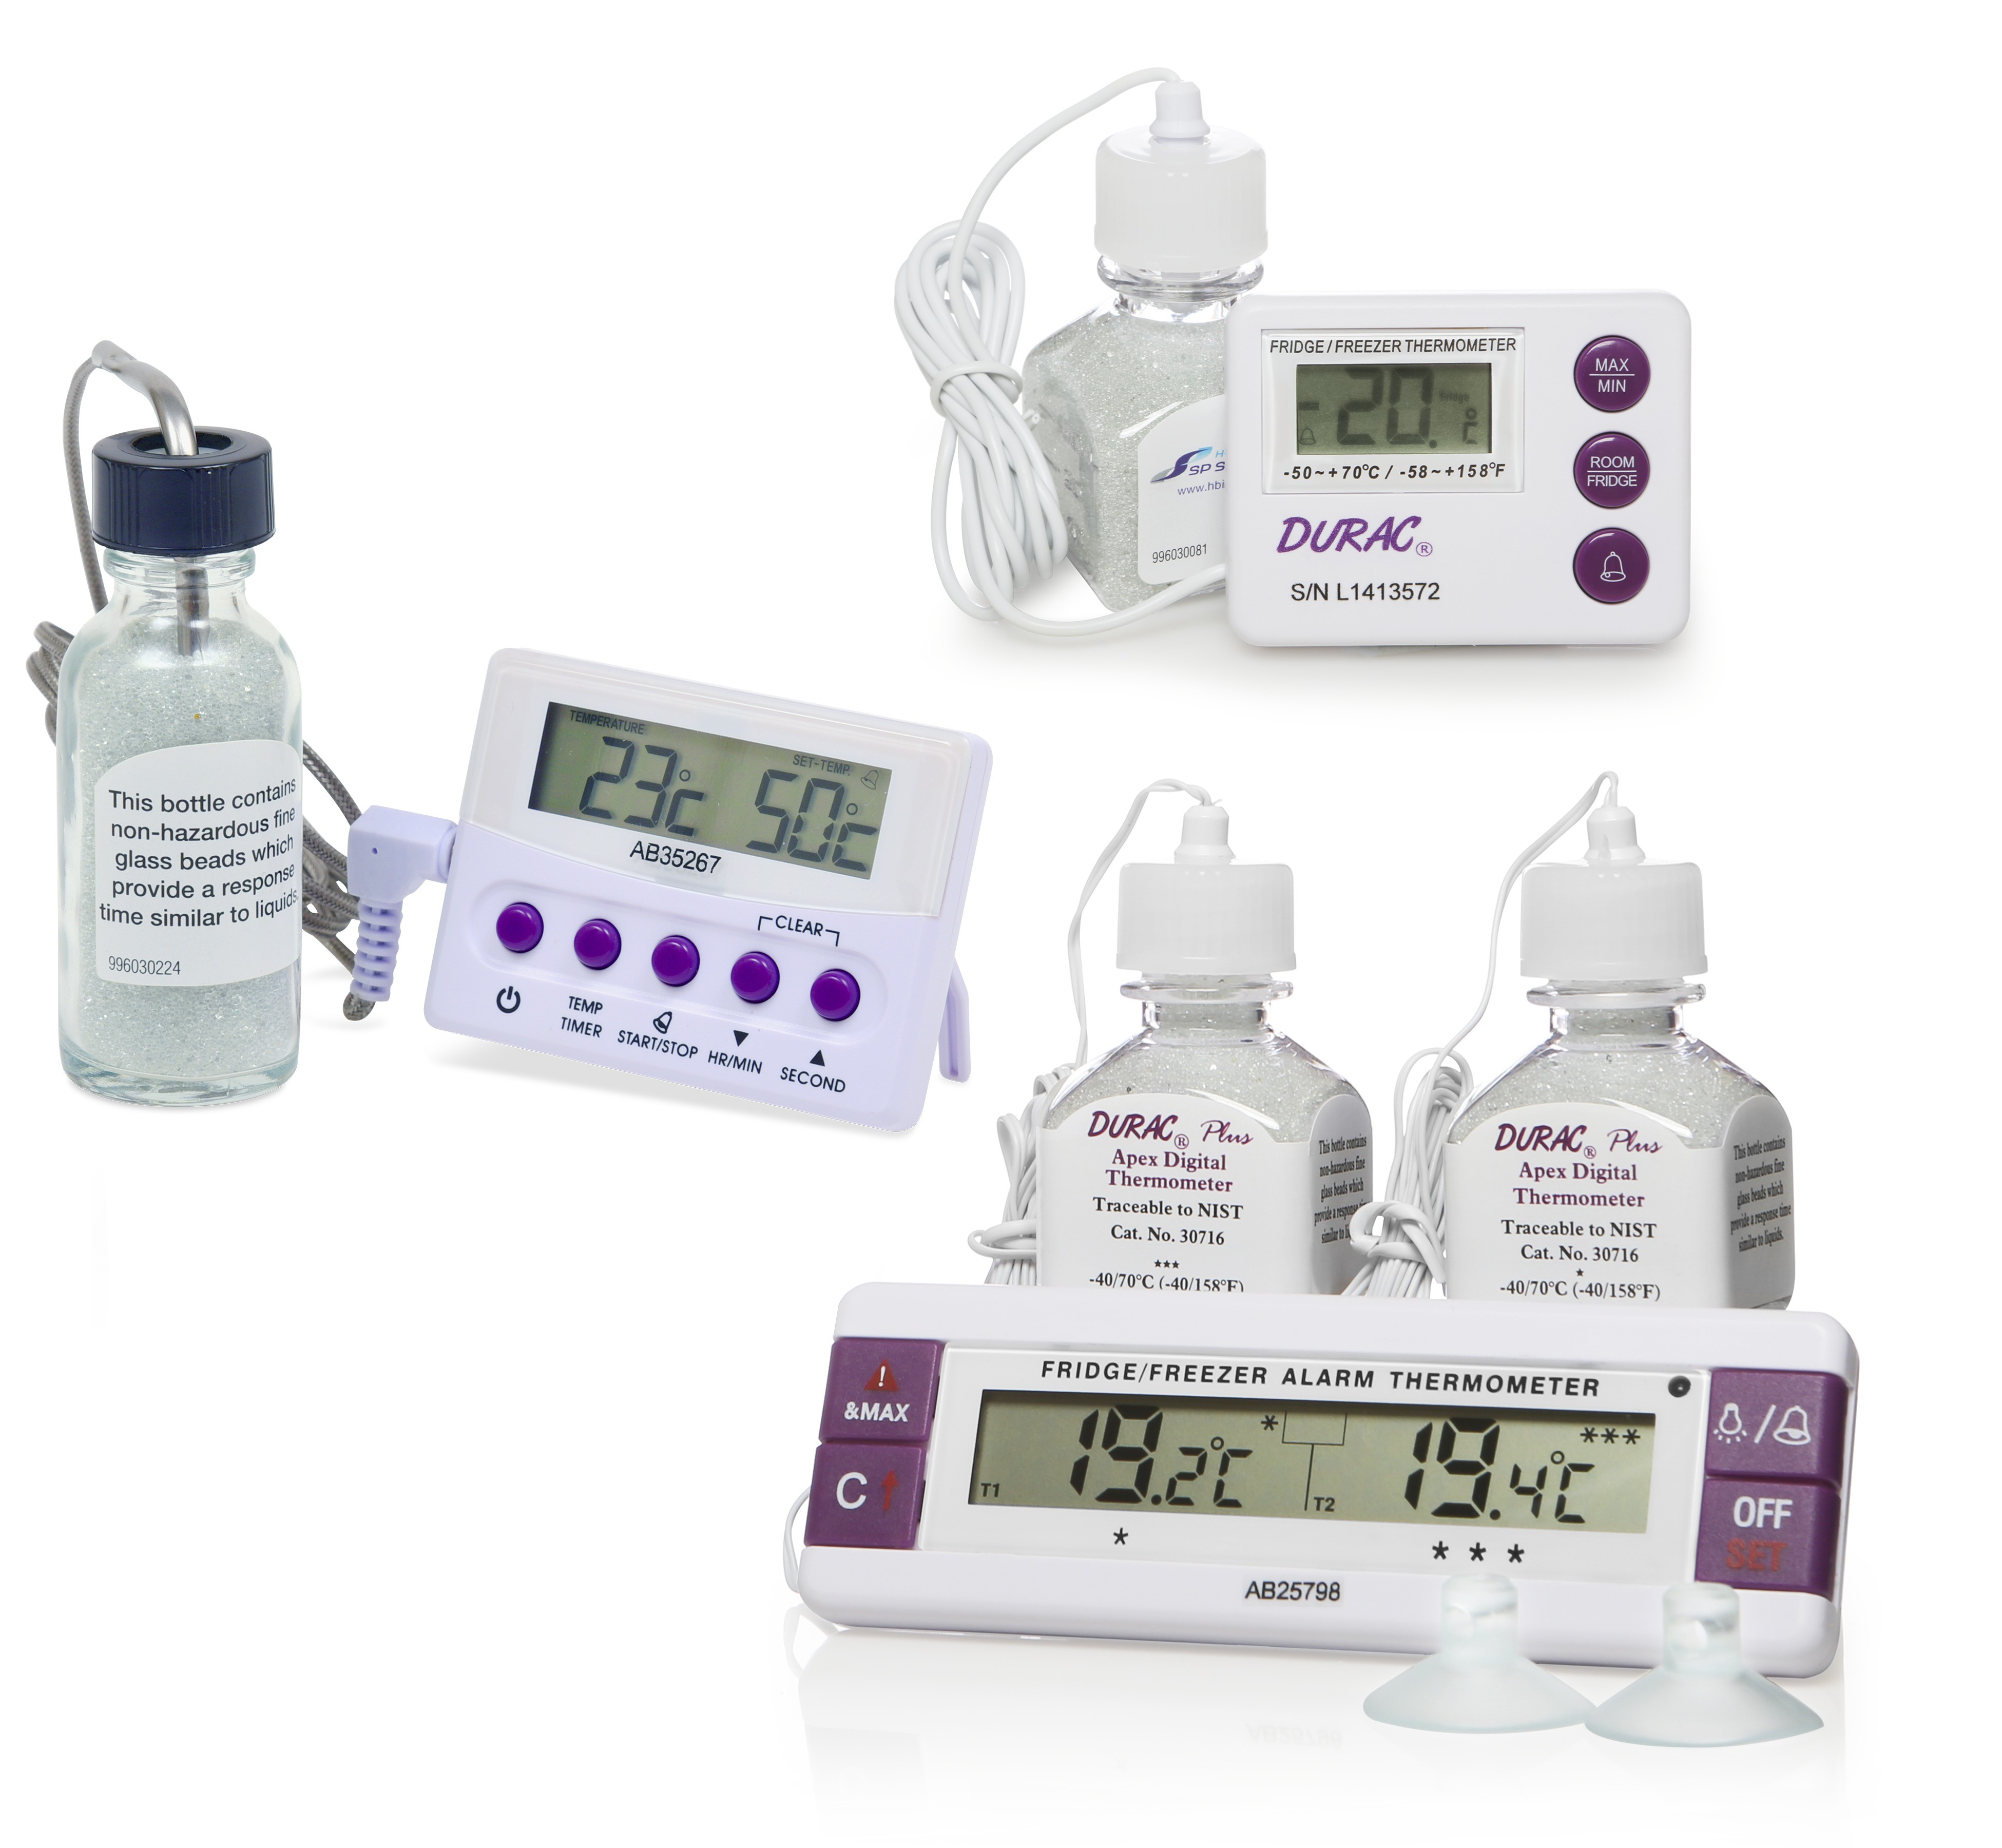 H-B Frio-Temp Calibrated Electronic Verification Thermometers for Freezers, Refrigerators, Incubators and Ovens